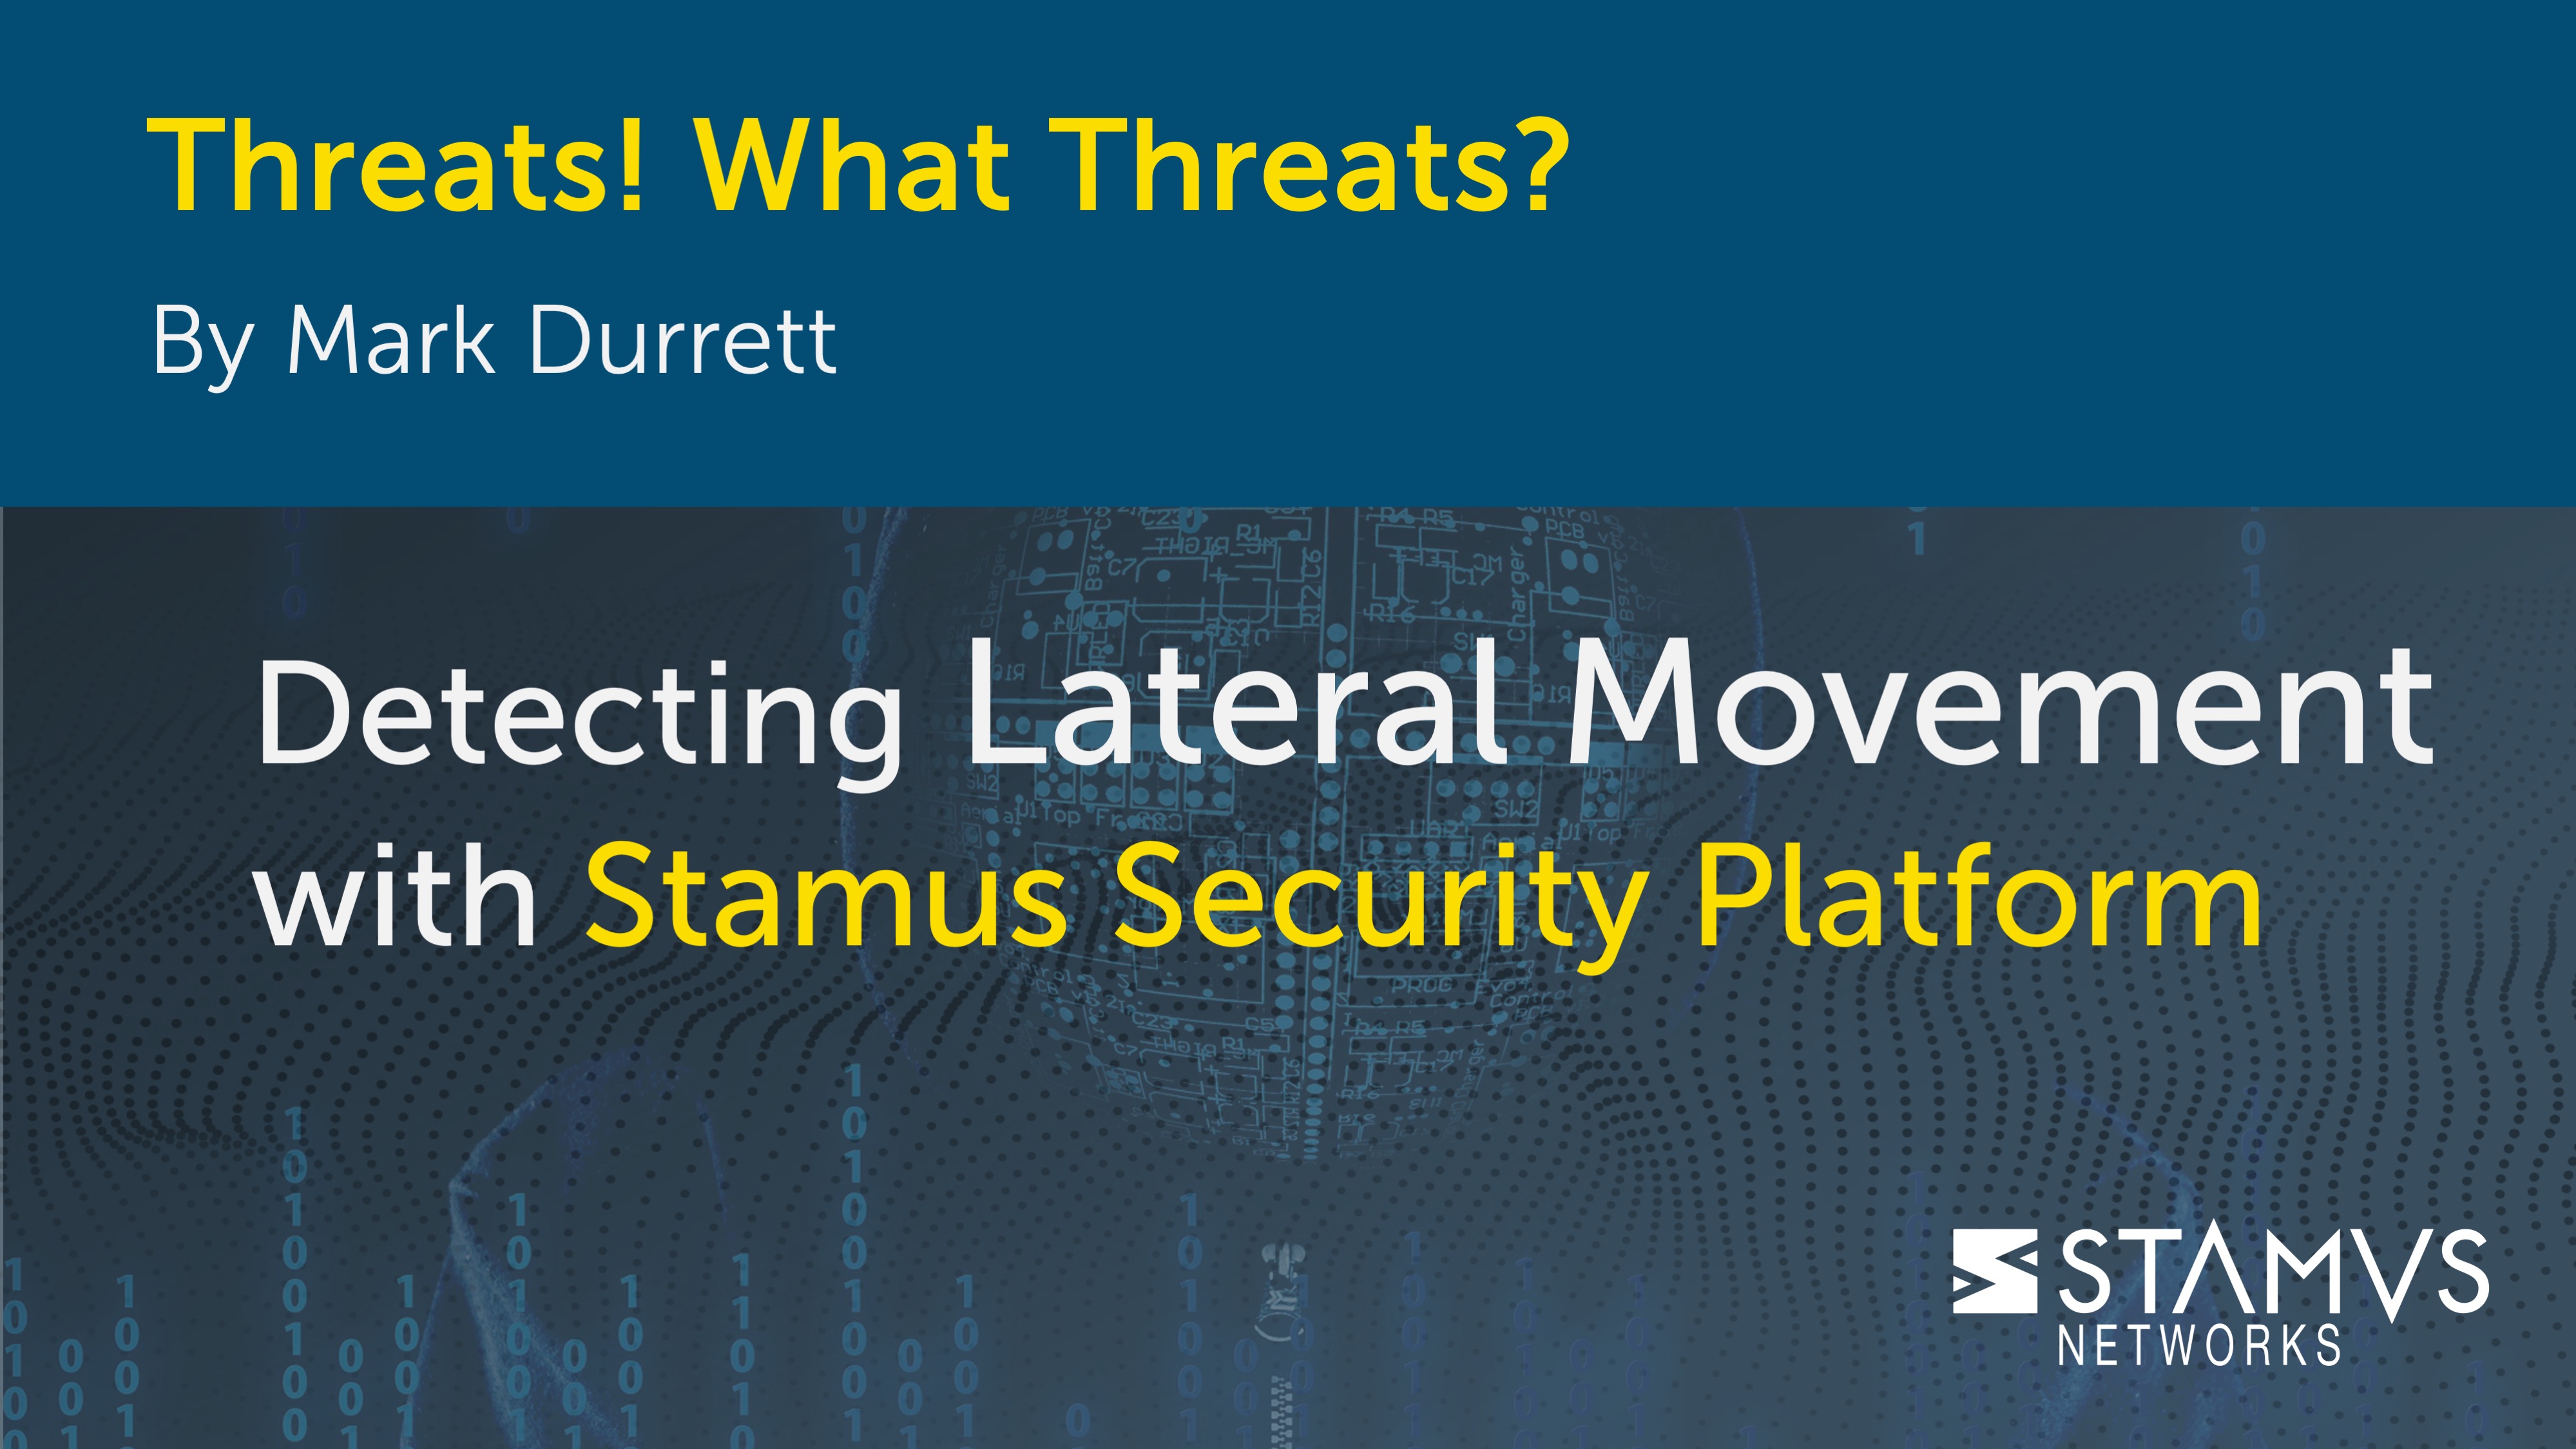 Threats! What Threats? Detecting Lateral Movement with Stamus Security Platform by Mark Durrett